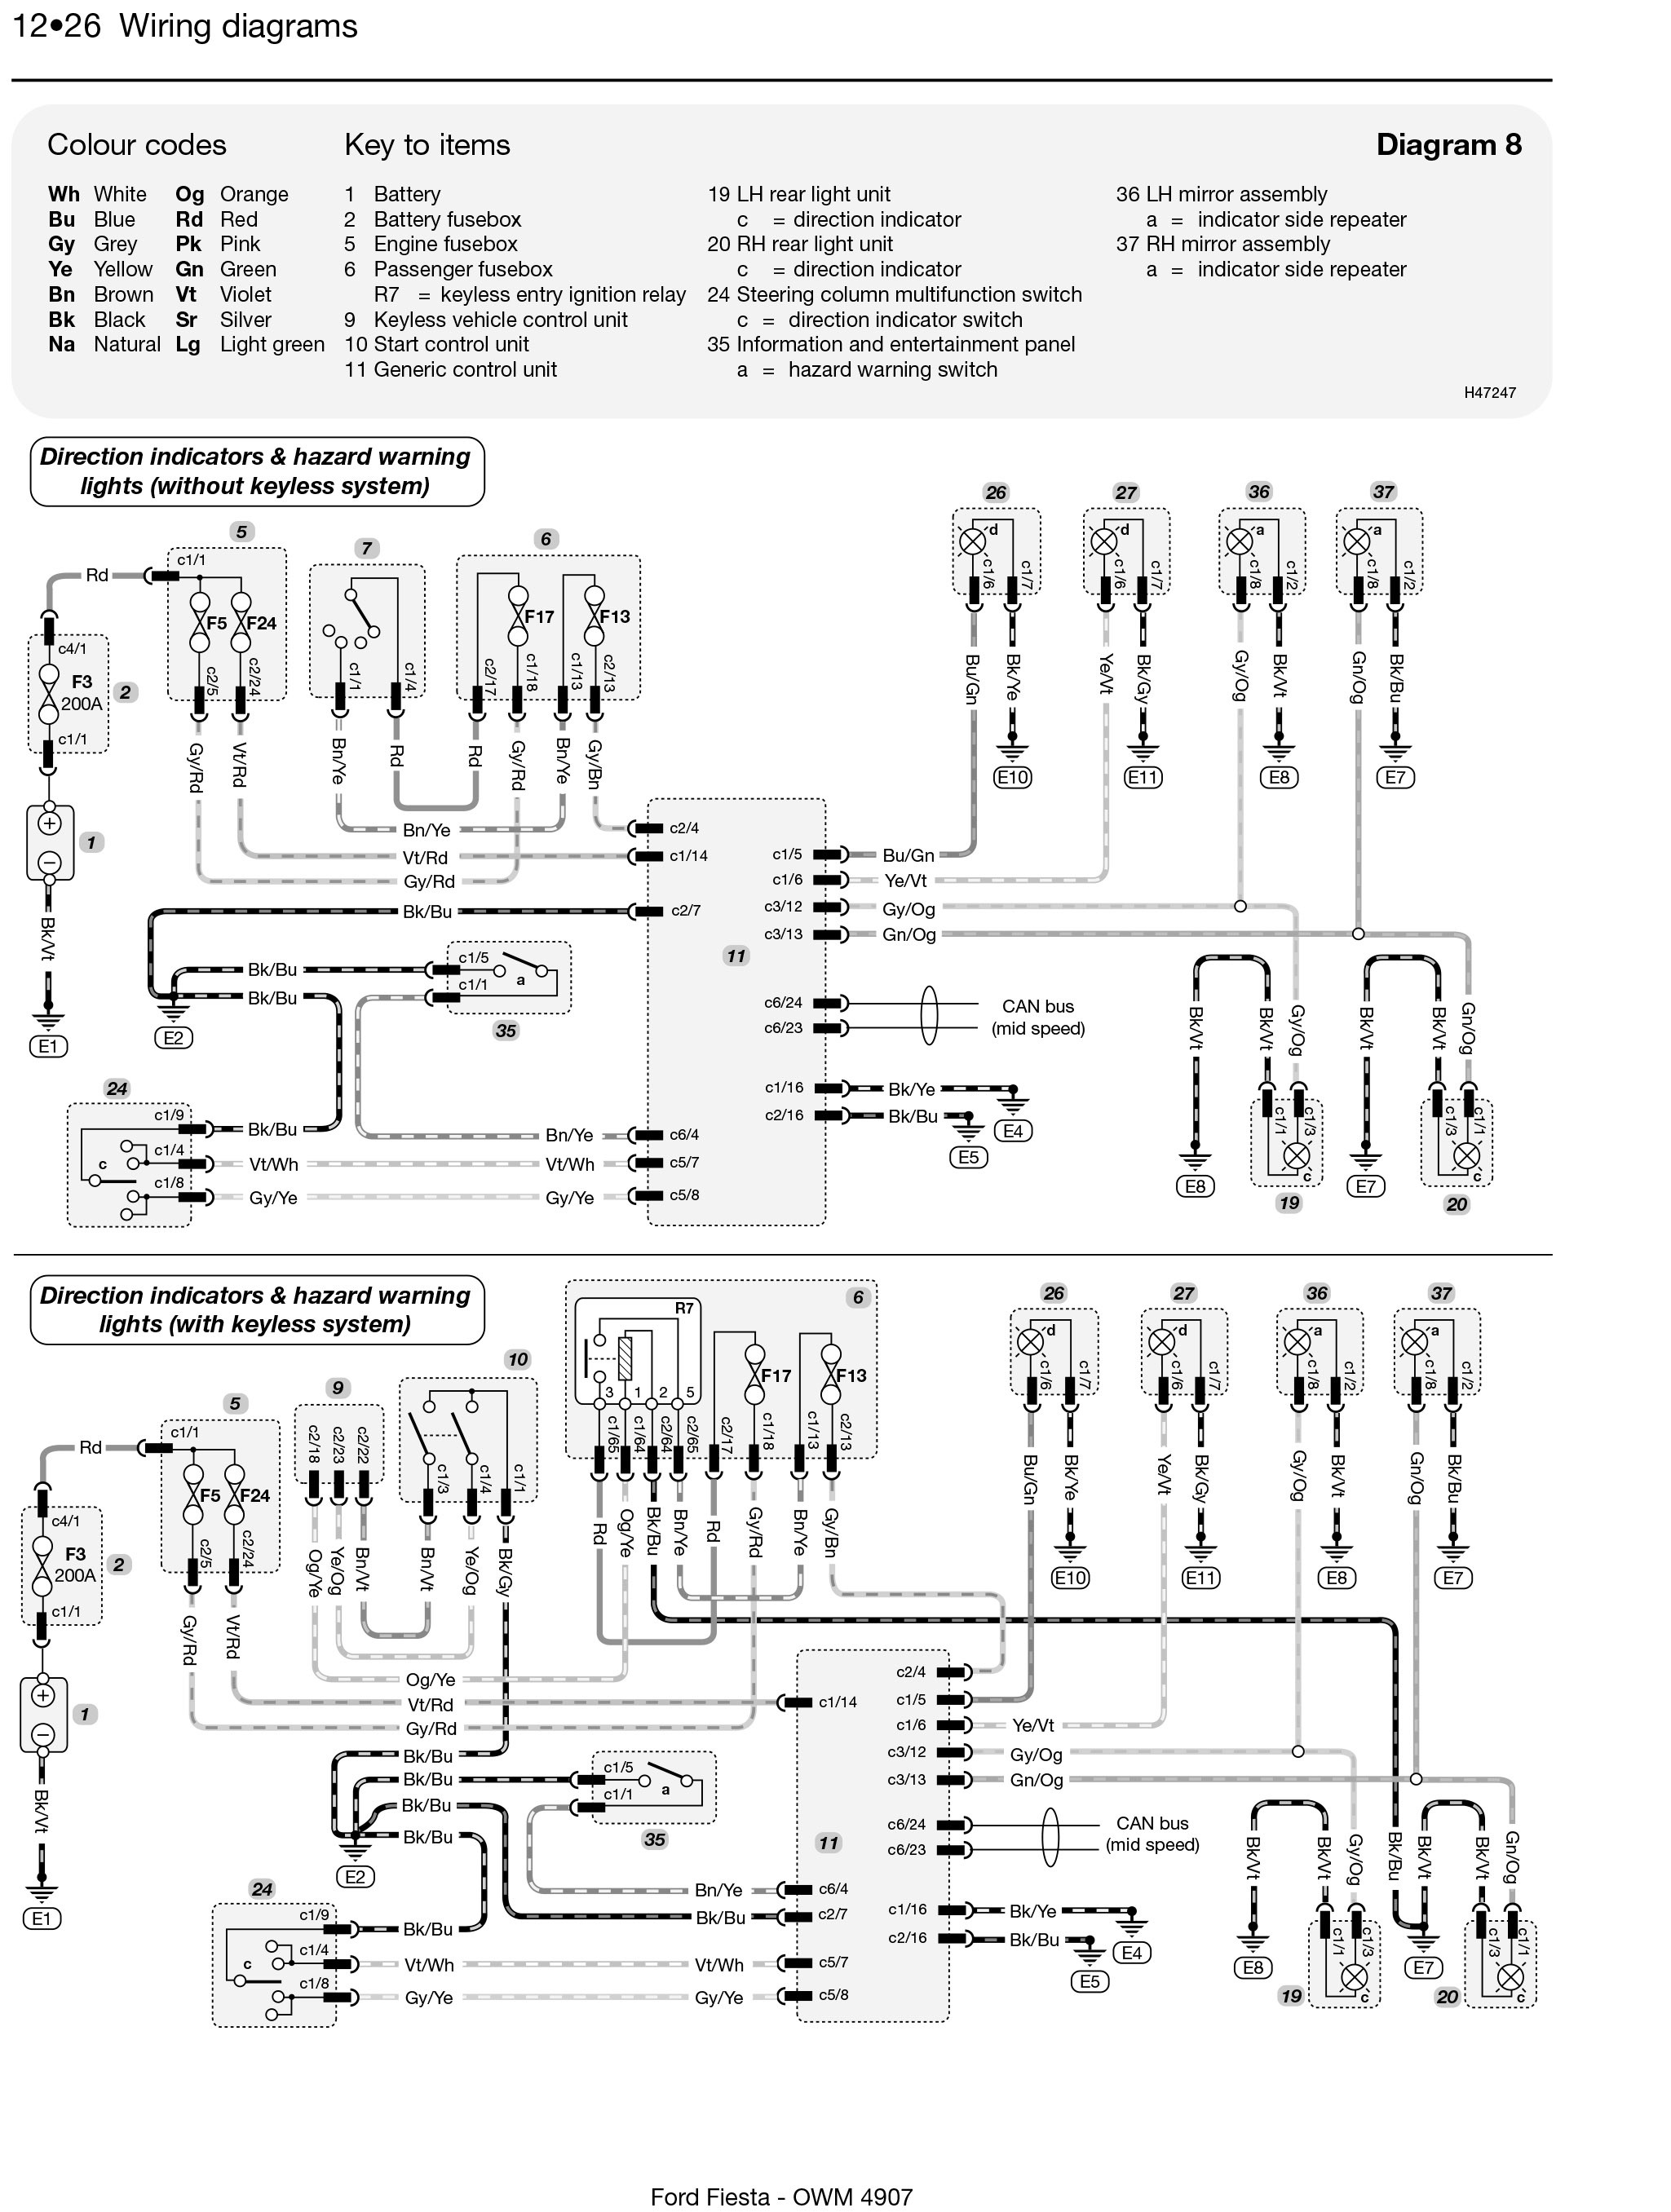 2001 ford Expedition Engine Diagram 2006 ford Expedition Fuel Pump Wiring Diagram ford Wiring Diagrams Of 2001 ford Expedition Engine Diagram